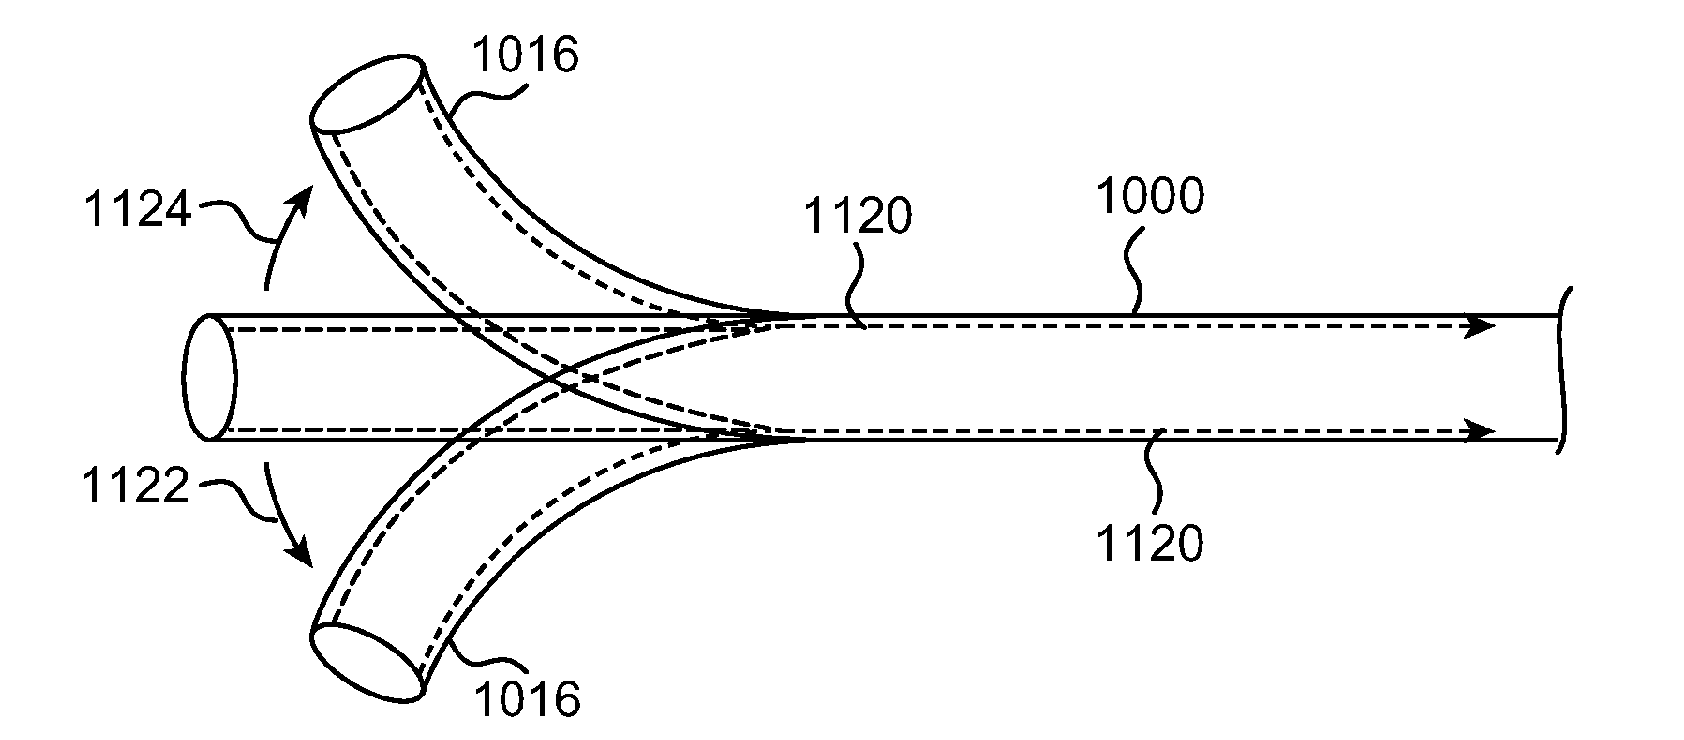 Catheter guiding system and methods